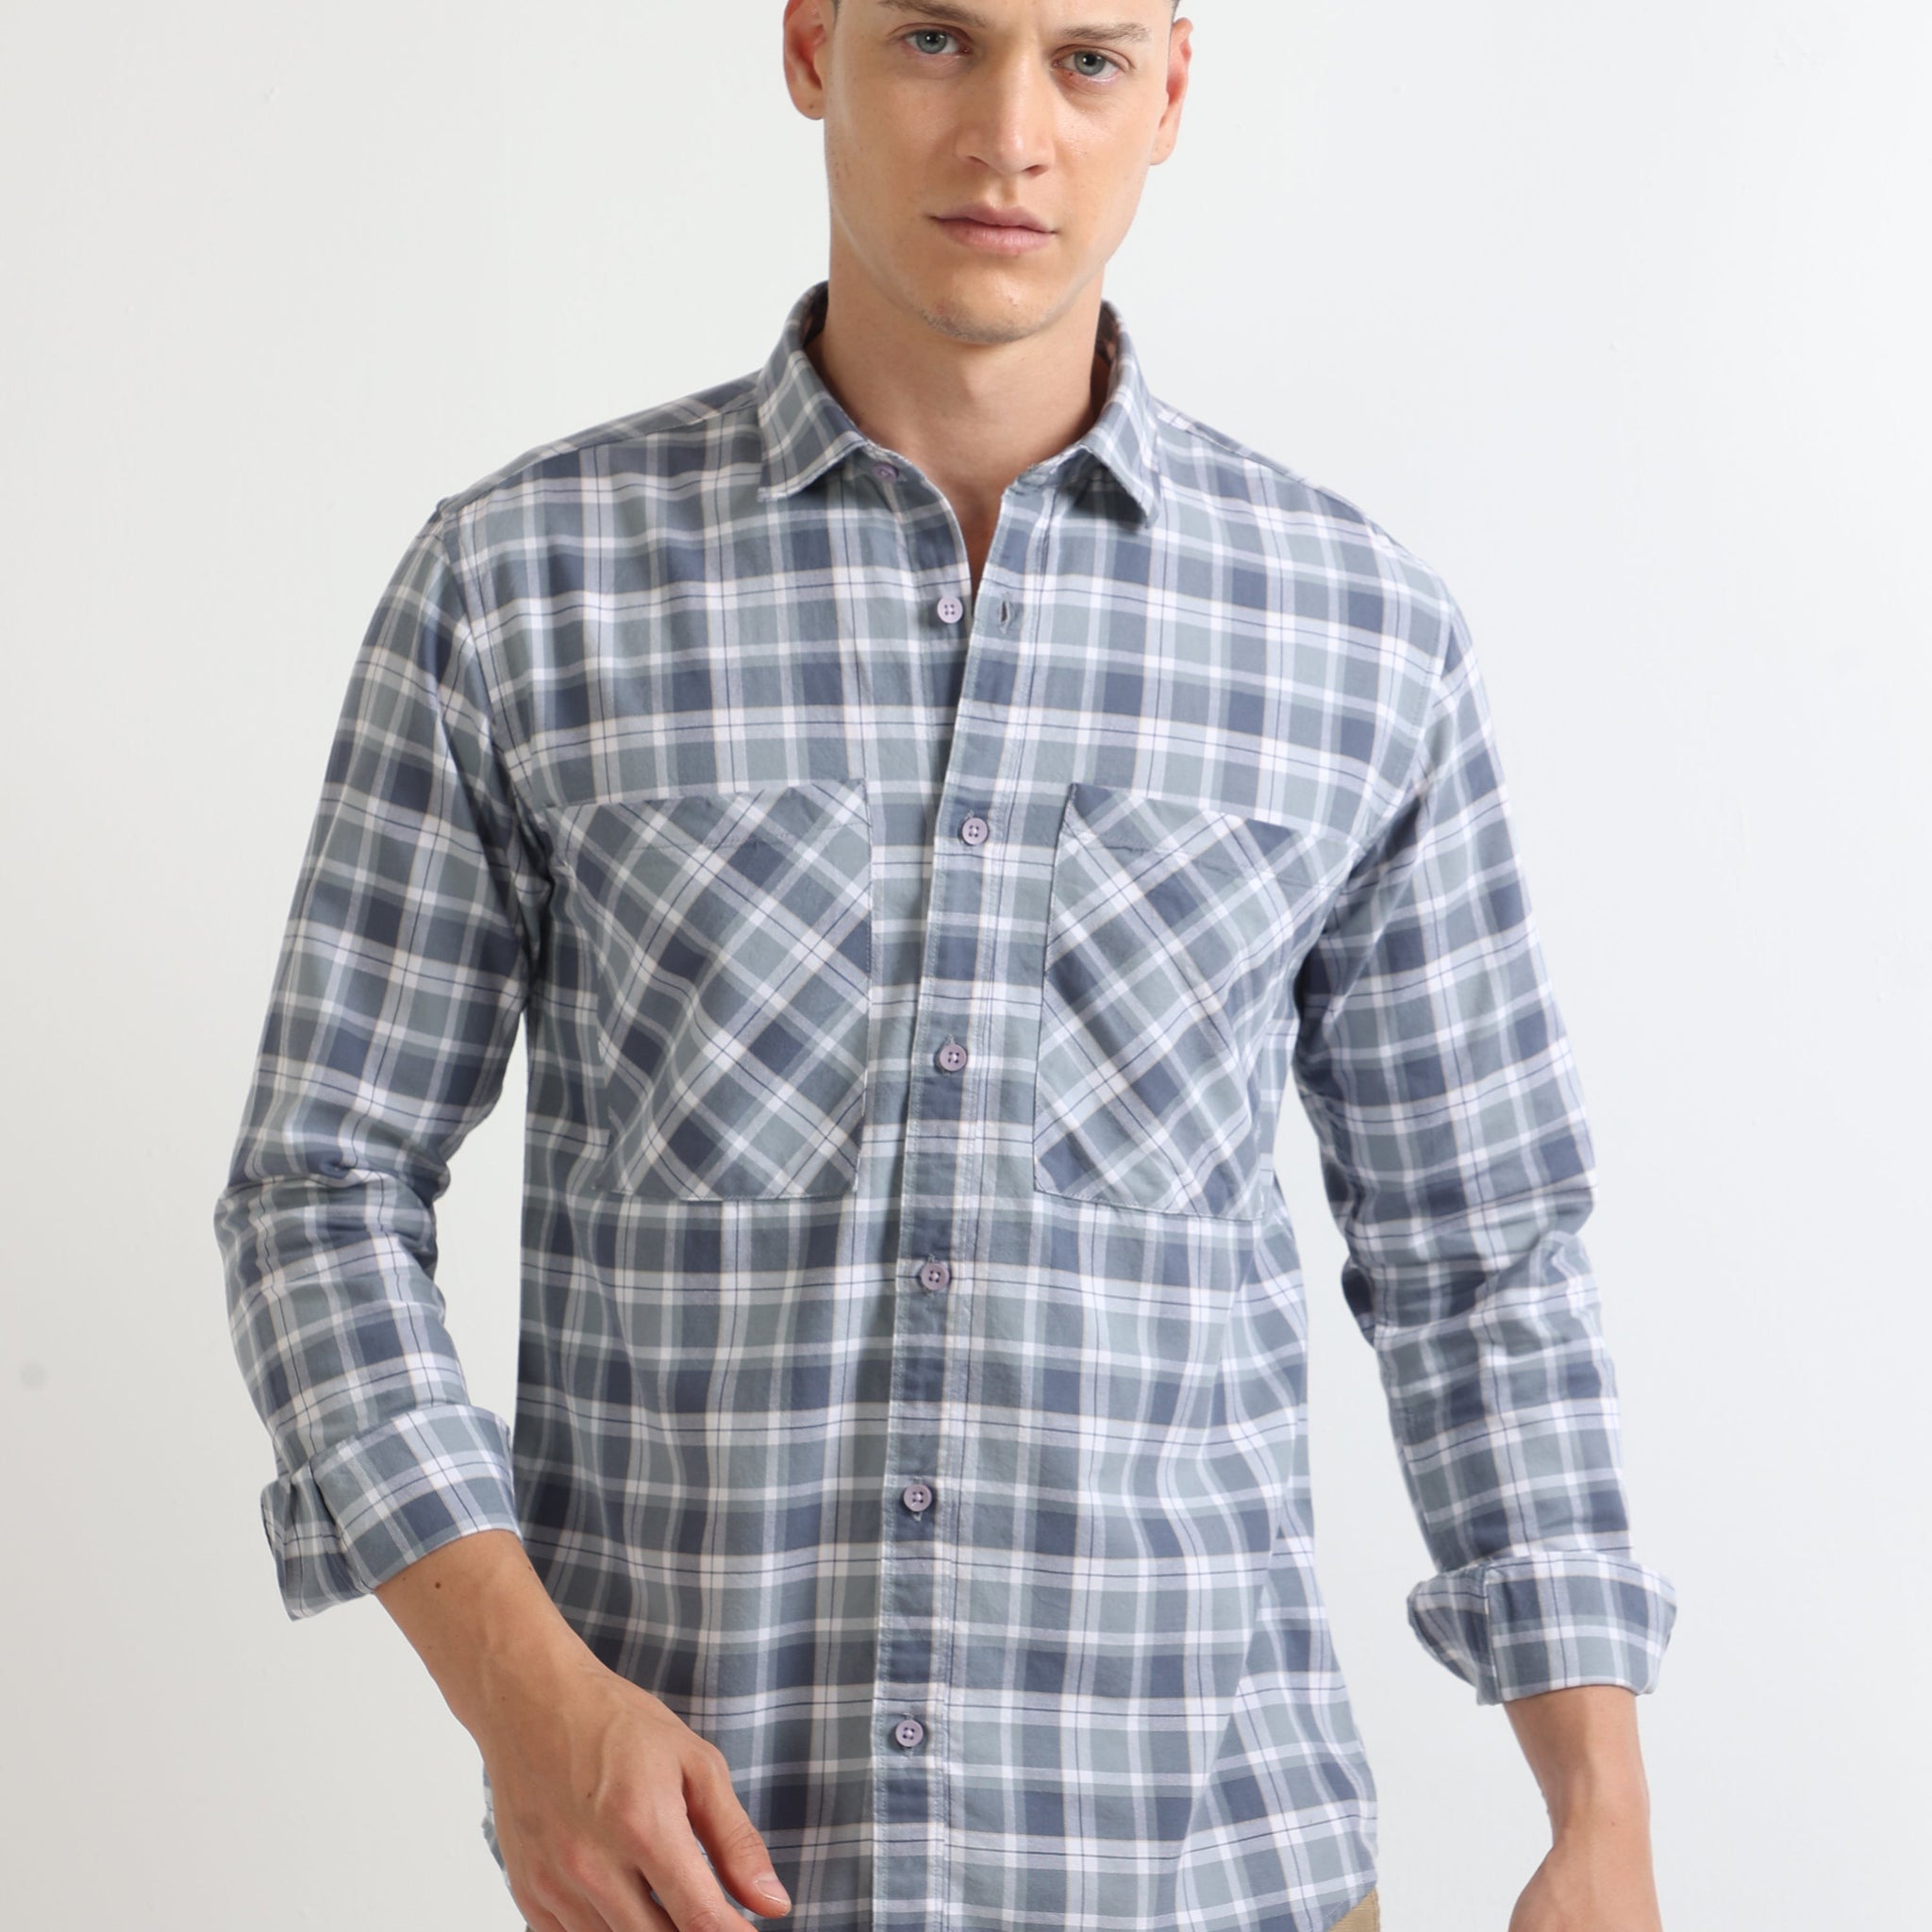 Buy Bia Double Pocket Oxford Shirt For Mens Online.